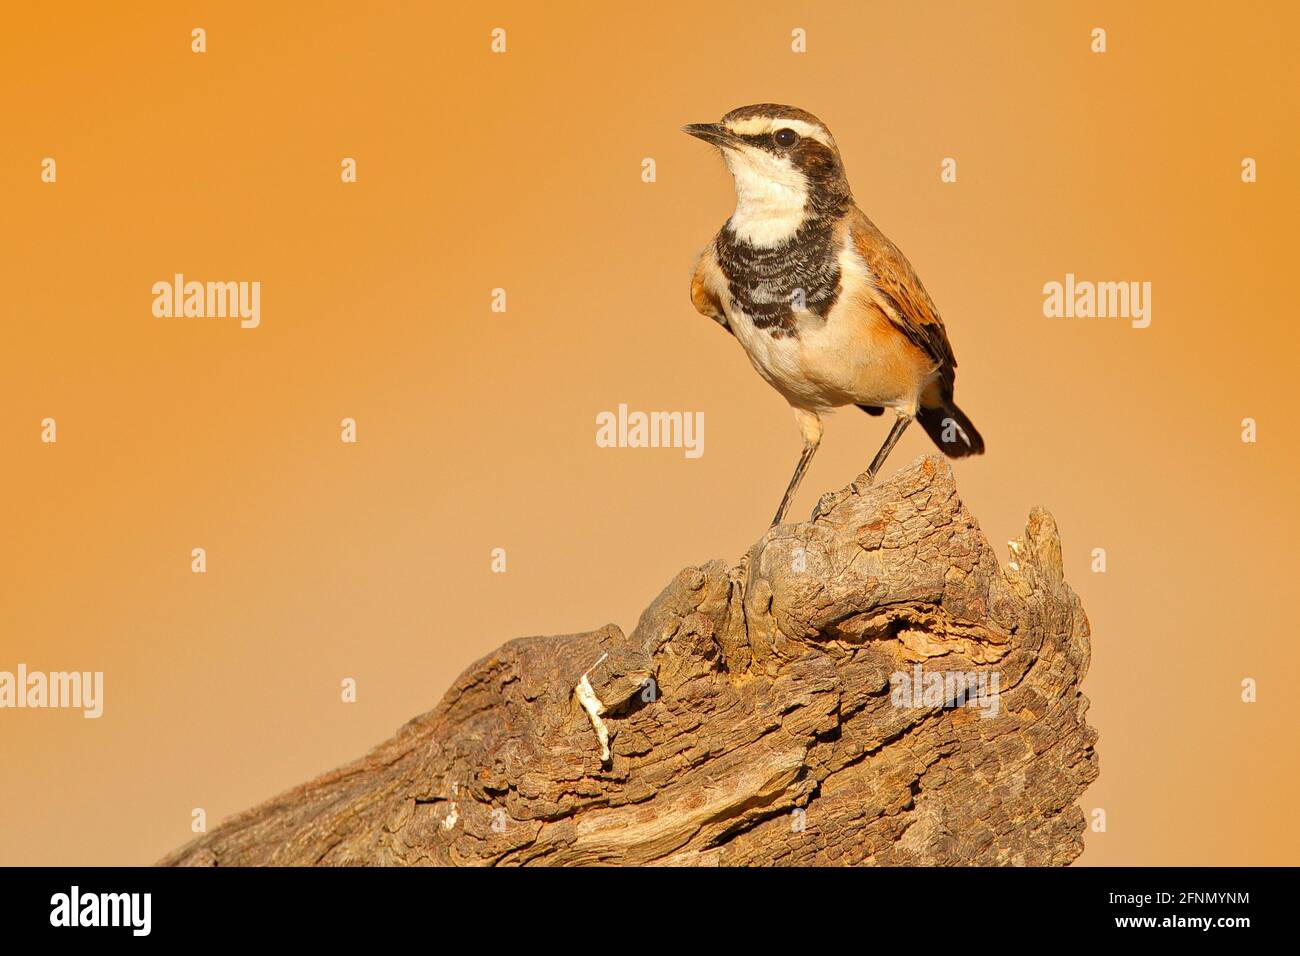 Capped wheatear, Oenanthe pileata, small insectivorous passerine bird, evening light in the nature. Wheatear sitting on the tree trunk. Wildlife scene Stock Photo